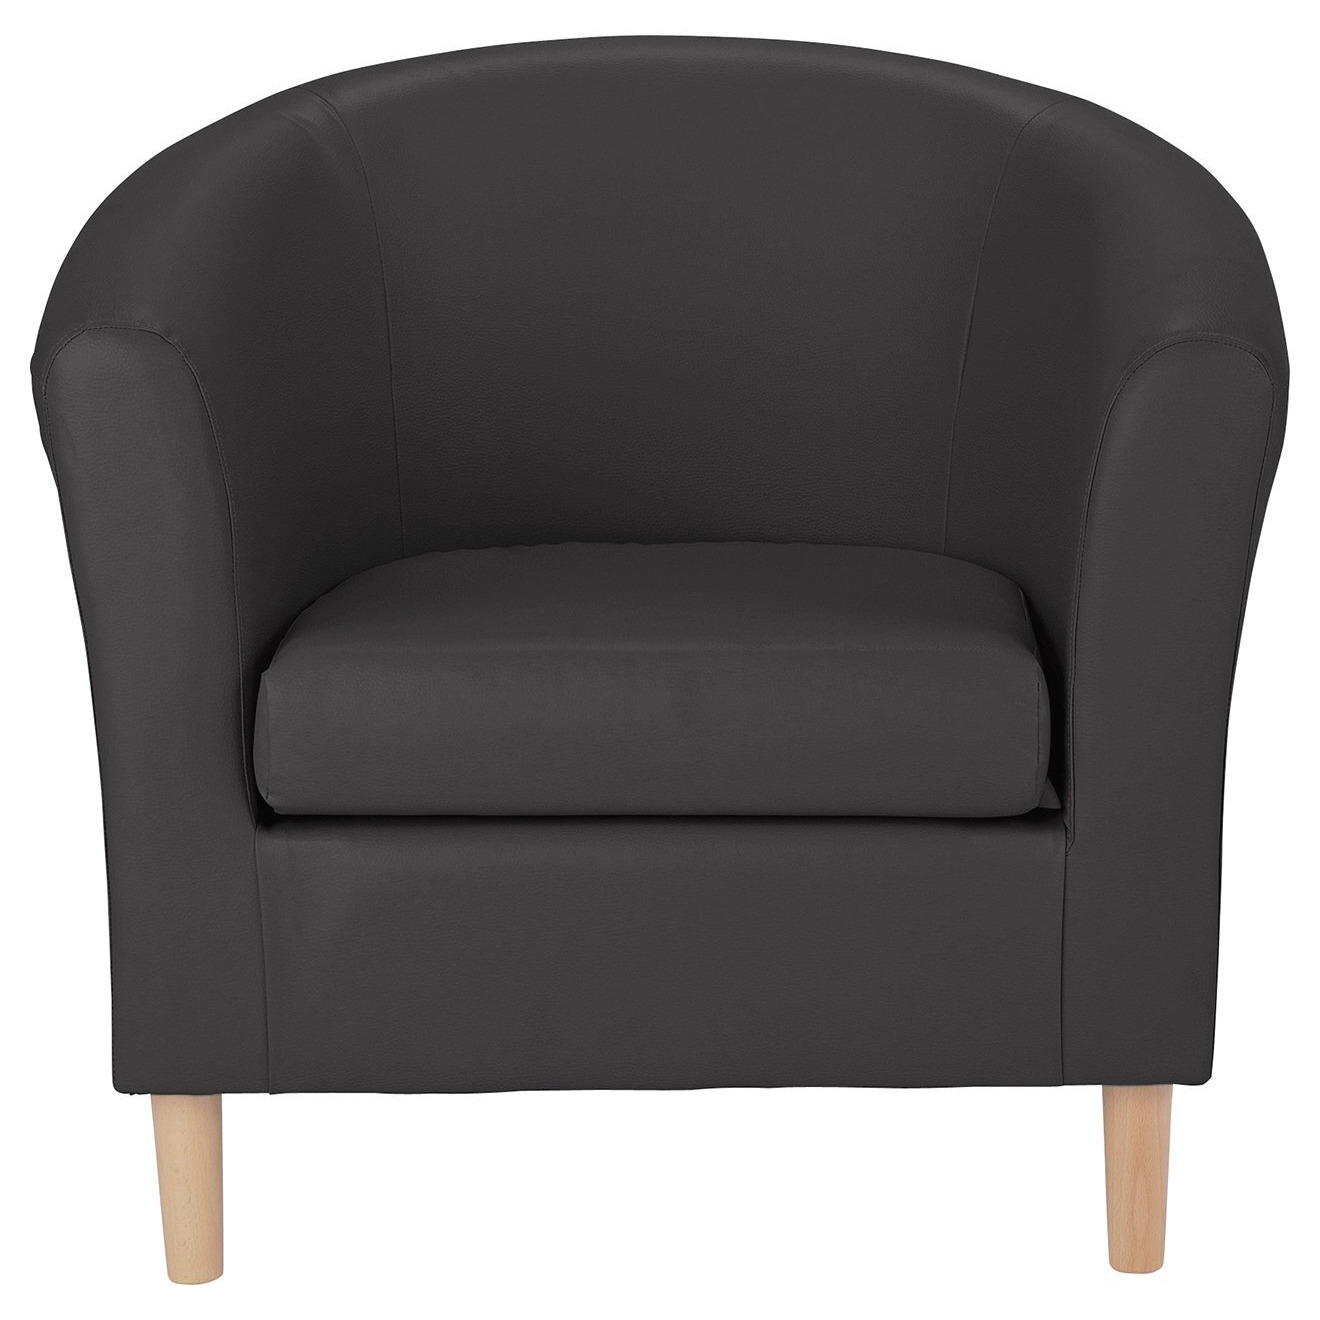 Argos Home Faux Leather Tub Chair - Black - image 1